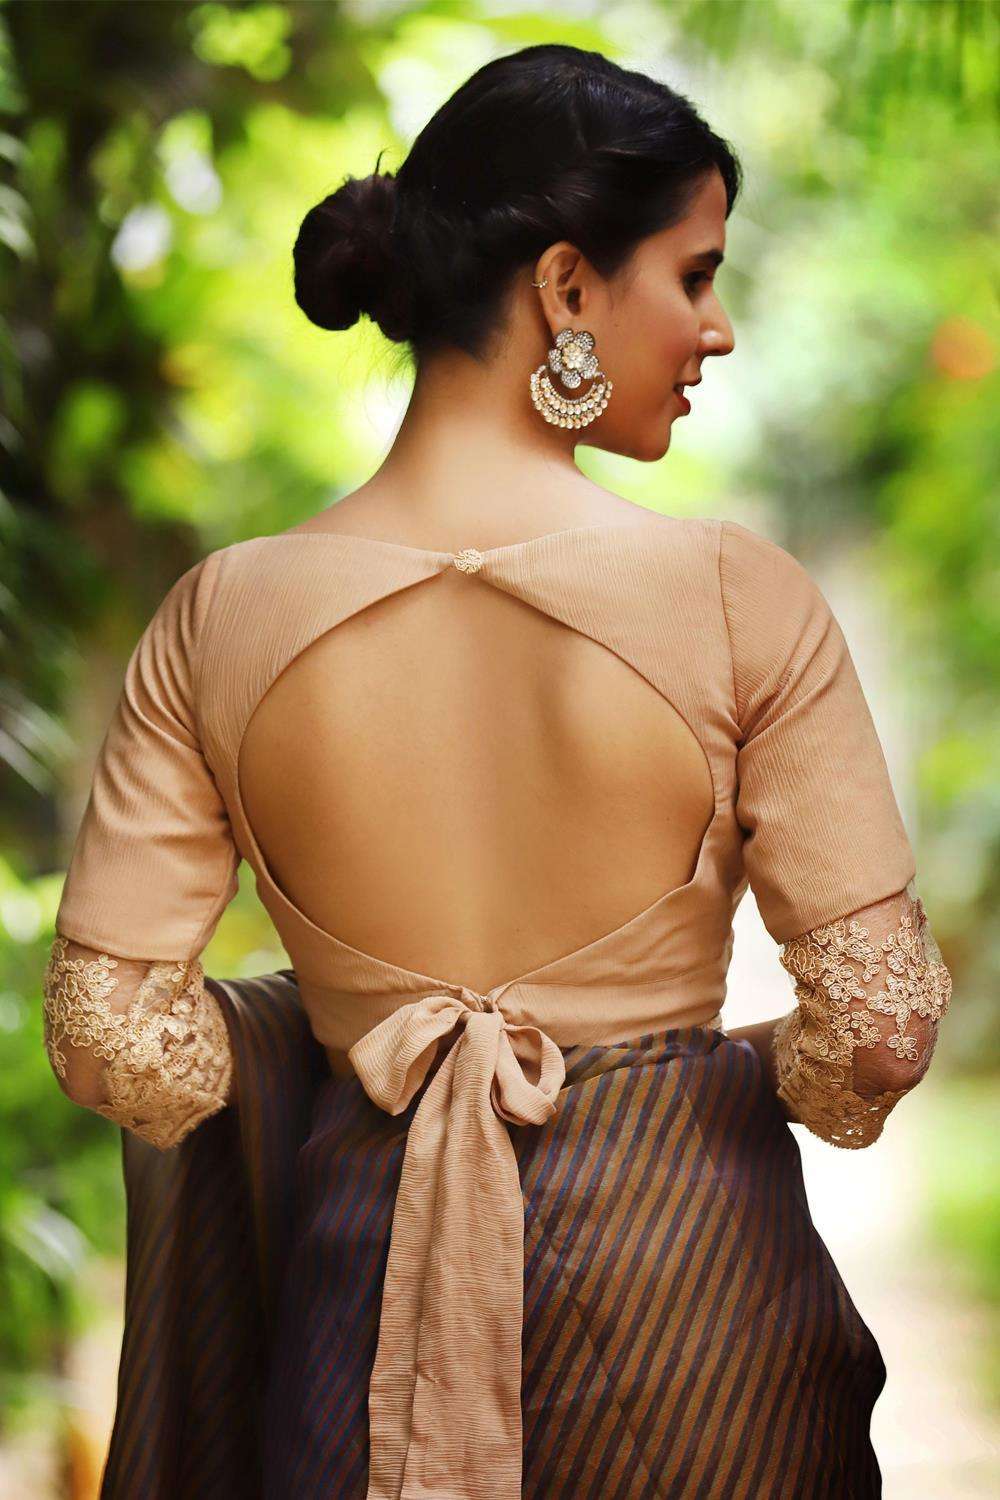 Beige chiffon blouse with chiffon and lace sleeve - House of Blouse